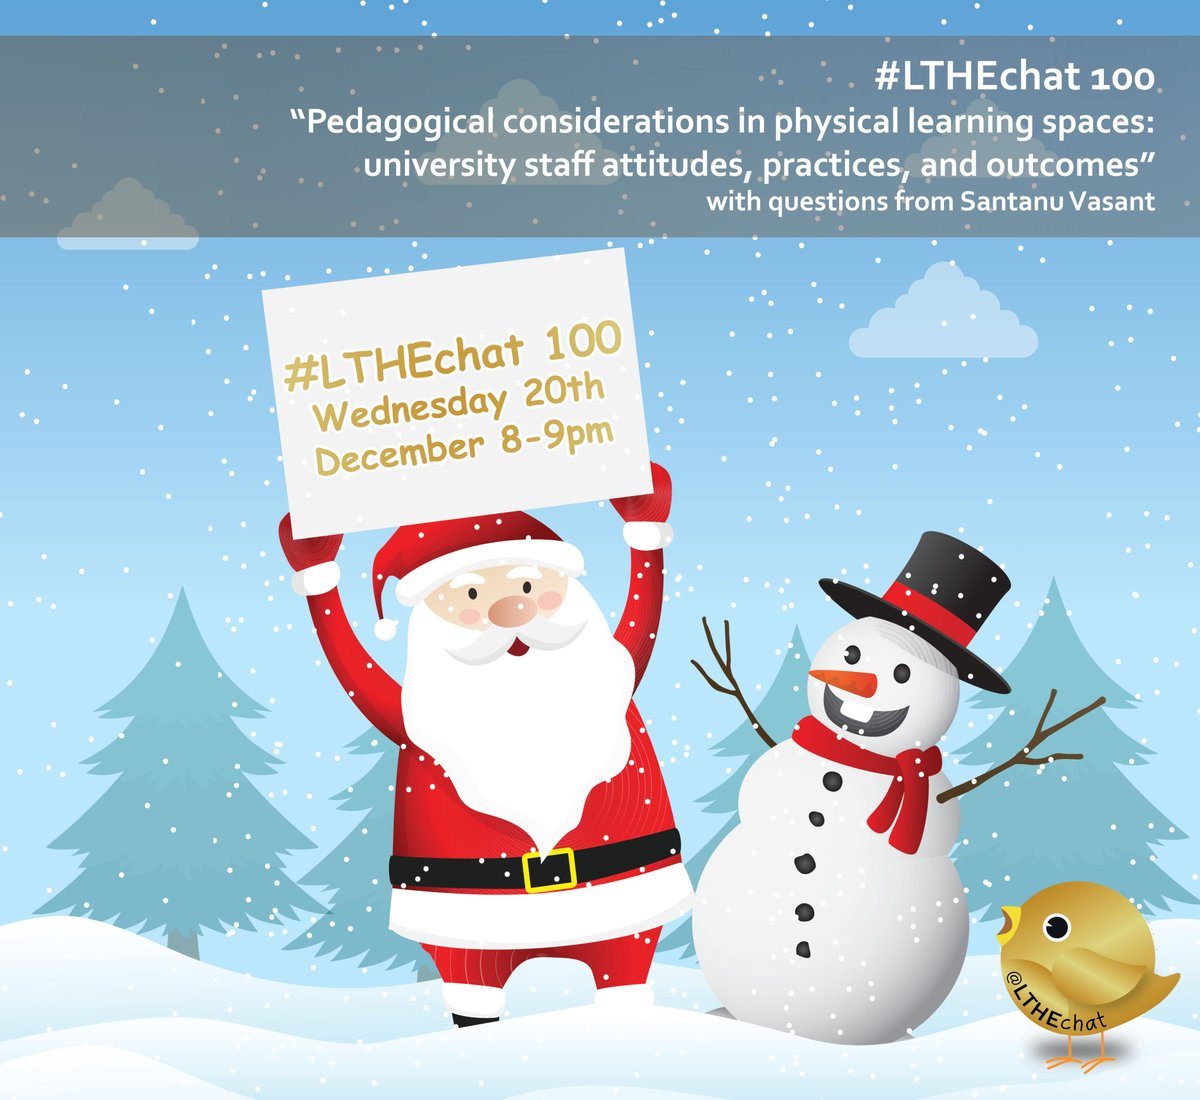 If you like all things #Twitter and #learningspaces, then @LTHEchat tomorrow at 8pm is your kind of place, join me and a cast of thousands, for the 100th #LTHEchat ! pls RT #SocMedHE17 https://t.co/pd4ohVocmE